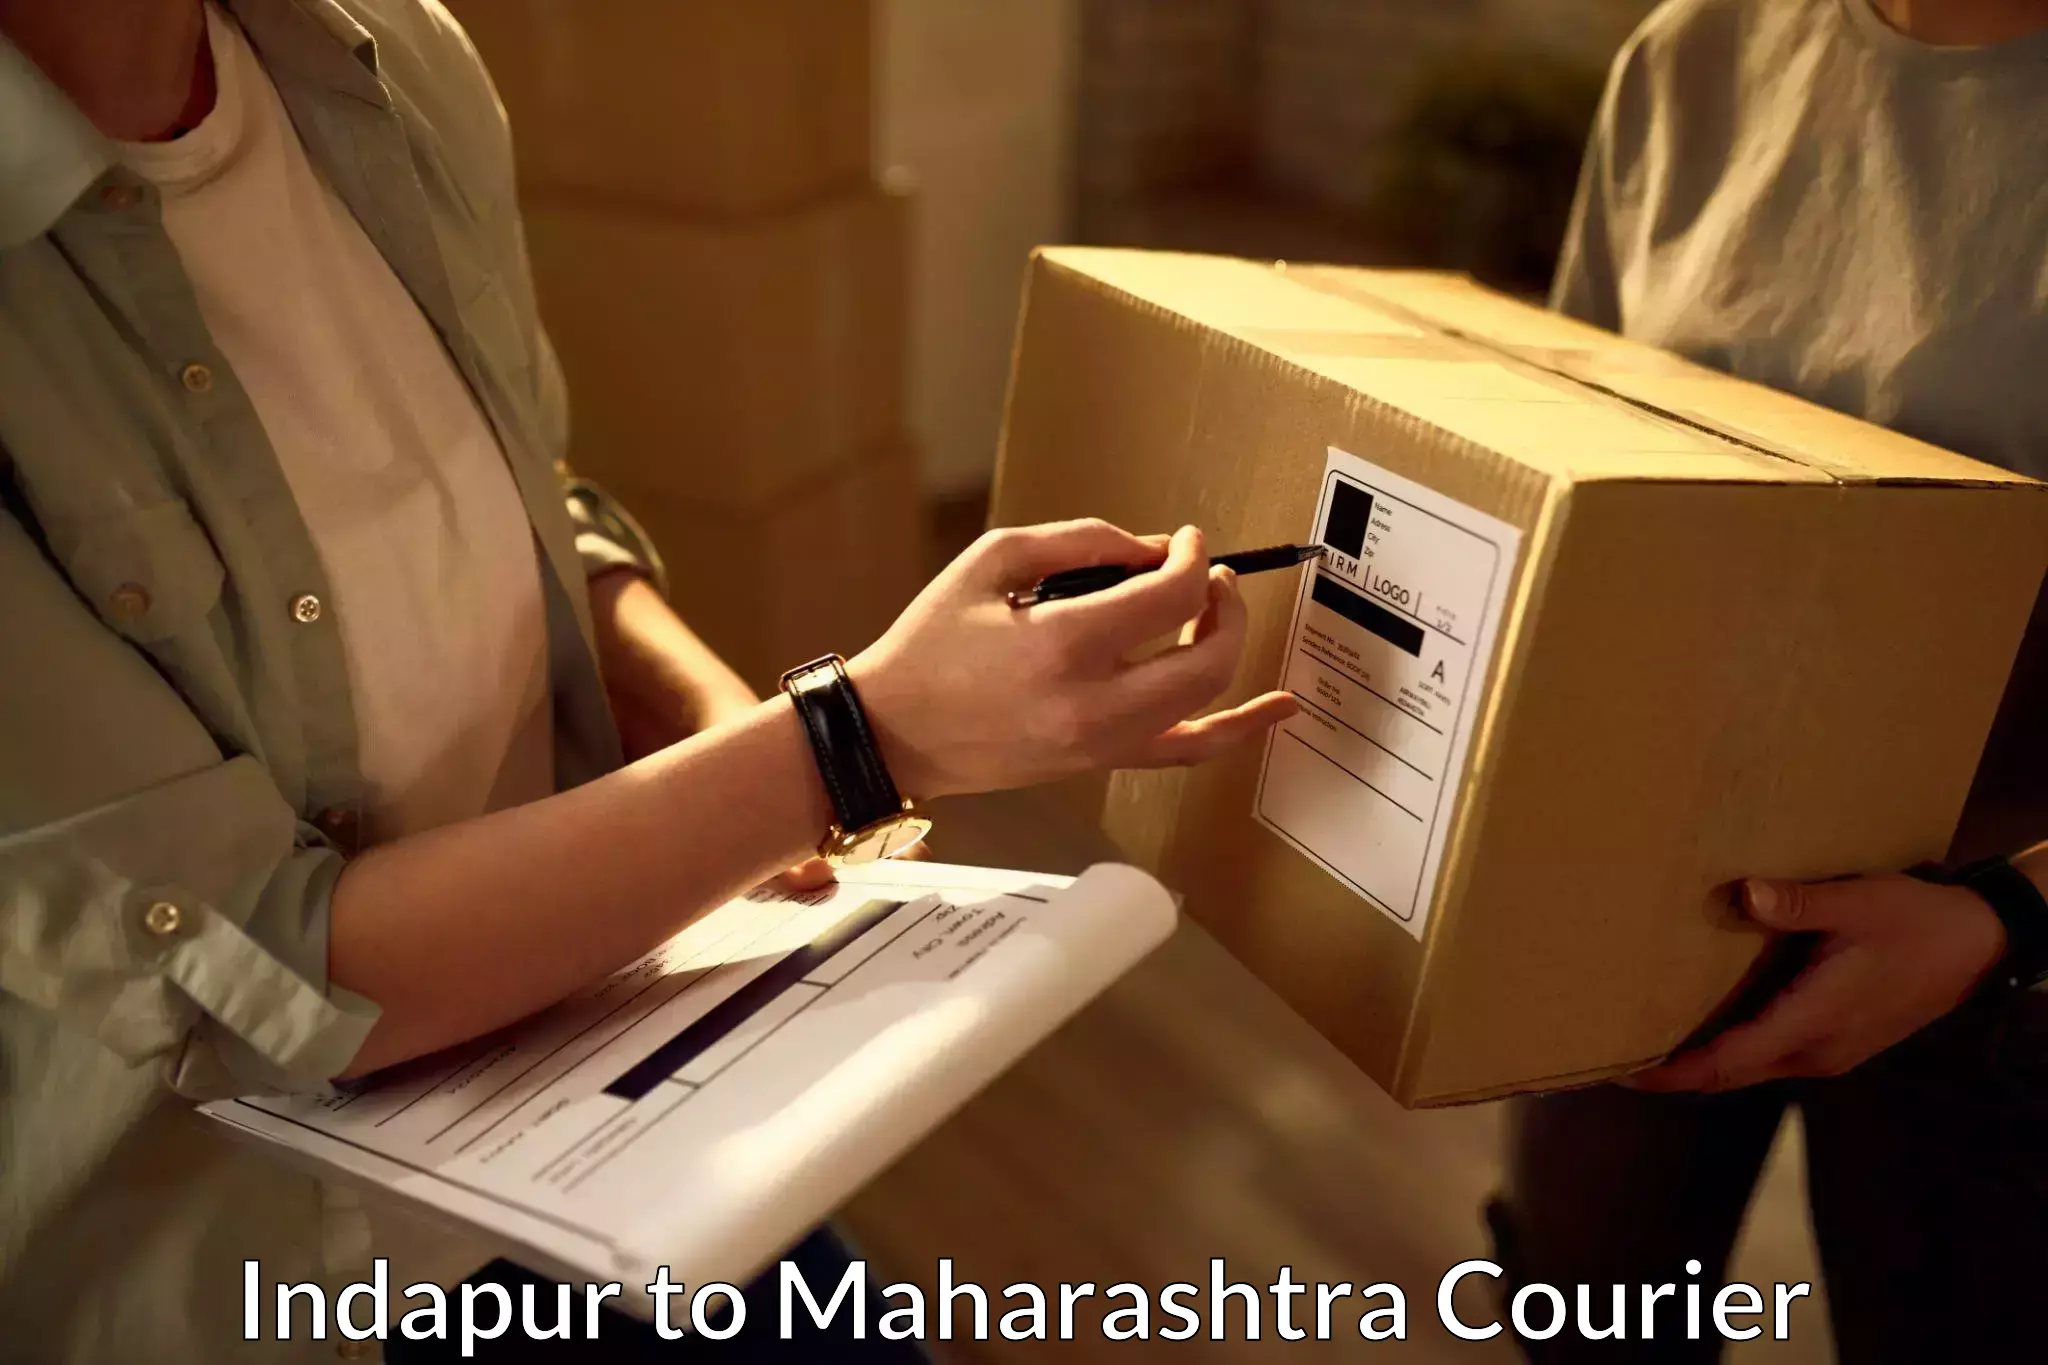 Quick dispatch service in Indapur to Maharashtra